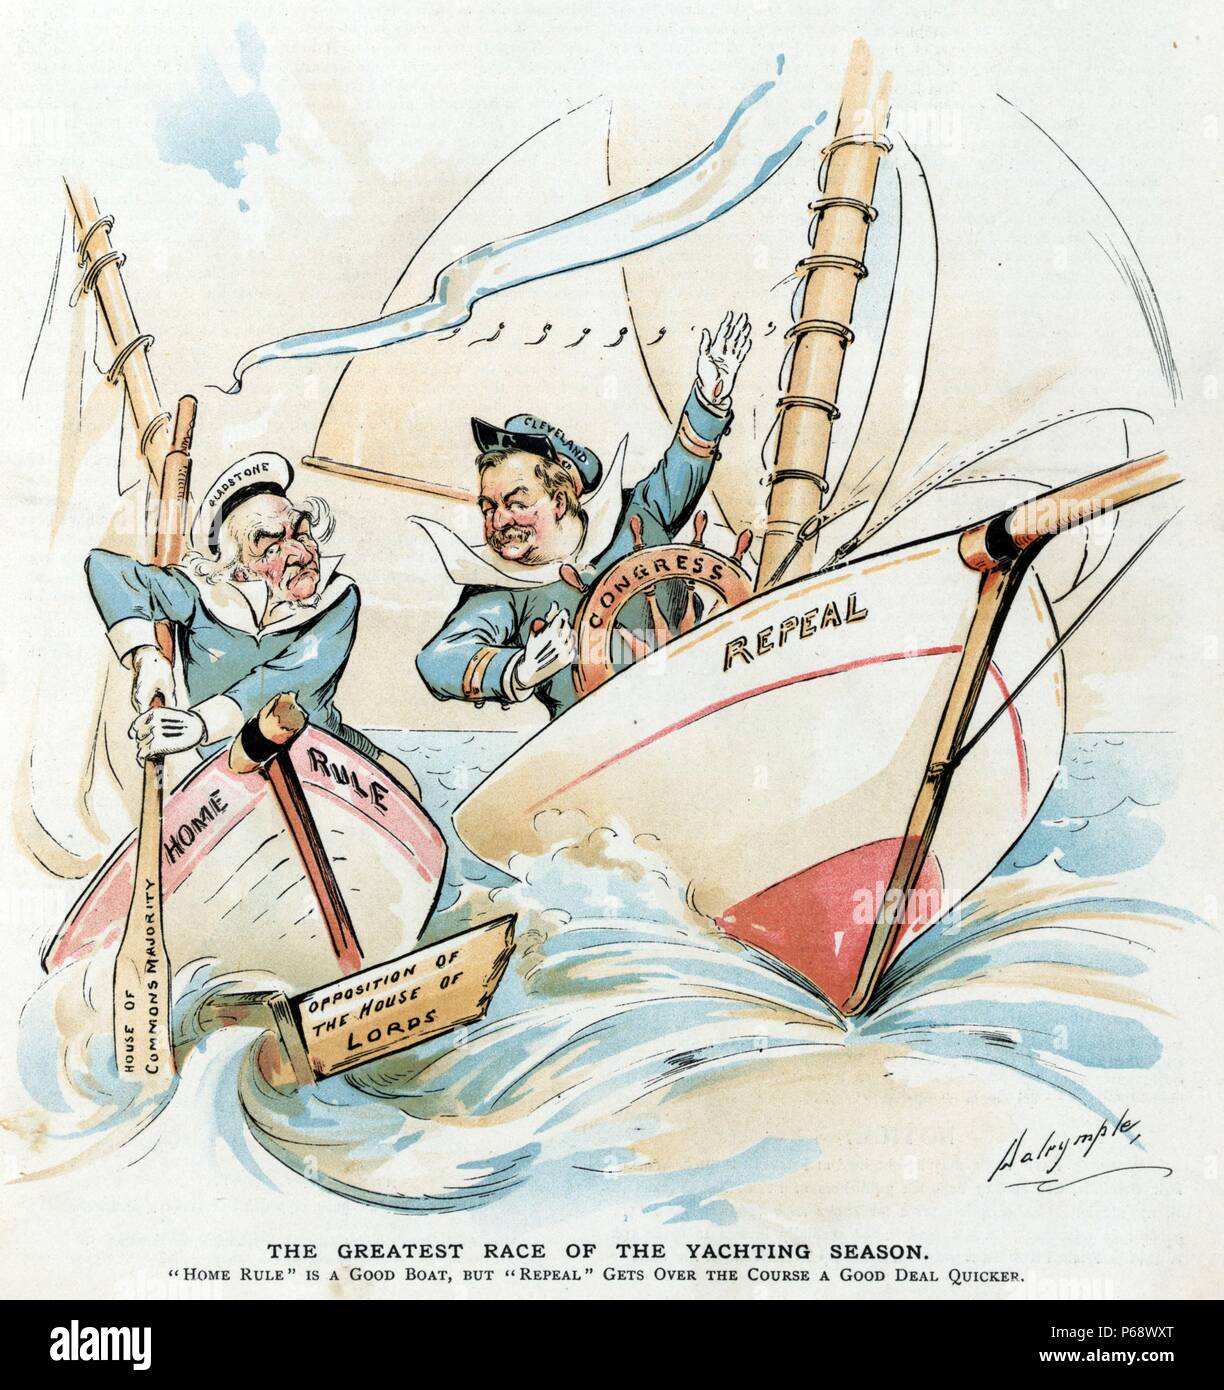 The greatest race of the yachting season by Louis Dalrymple, 1866-1905, artist, 1893. President Cleveland at the helm labelled 'Congress' of a yacht labelled 'Repeal' in a race against British Prime Minister William E. Gladstone who is holding an oar labelled 'House of Commons Majority' and piloting a boat labelled 'Home Rule', which has a broken spar and is bumping up against debris labelled 'Opposition of the House of Lords' floating in the water. Stock Photo